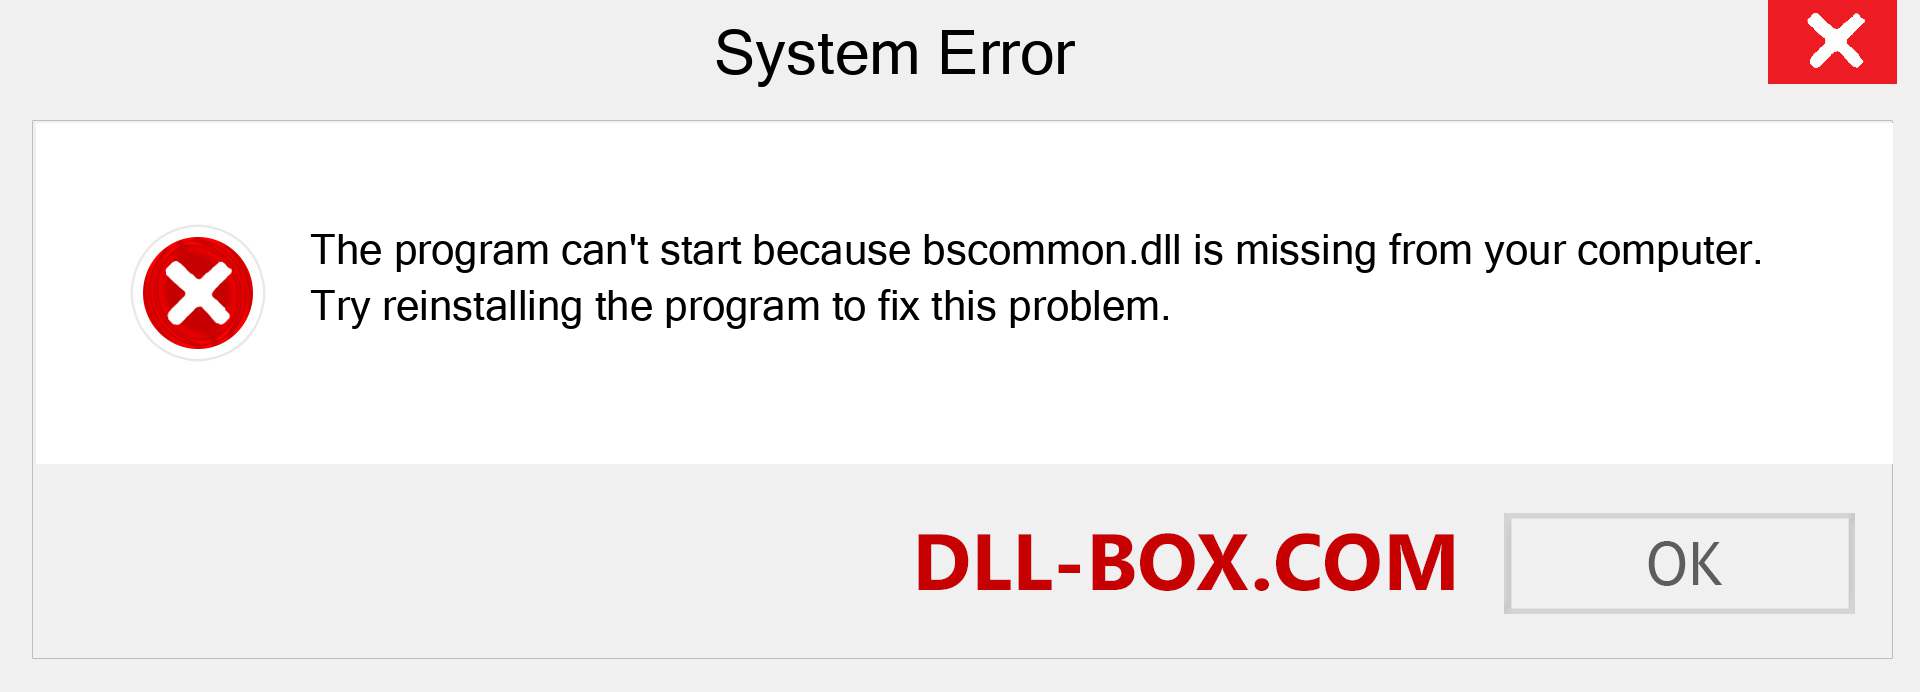  bscommon.dll file is missing?. Download for Windows 7, 8, 10 - Fix  bscommon dll Missing Error on Windows, photos, images